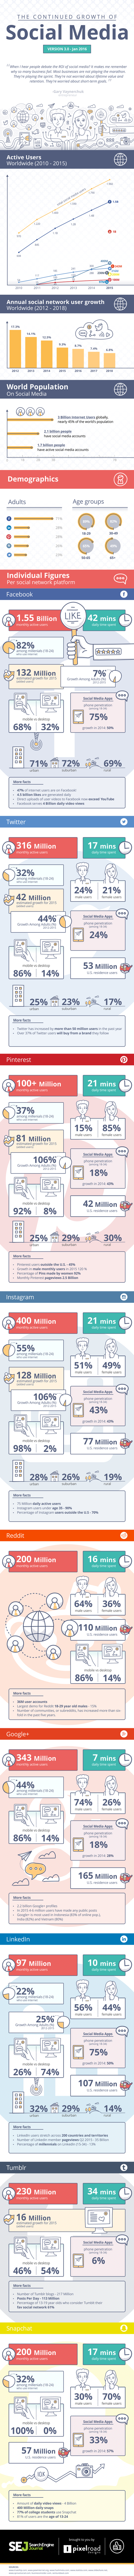 100+ Incredible Social Media Facts, Figures & Stats 2016: Facebook, YouTube, Twitter, Instagram, Google+, Snapchat, Pinterest, LinkedIn and Tumblr